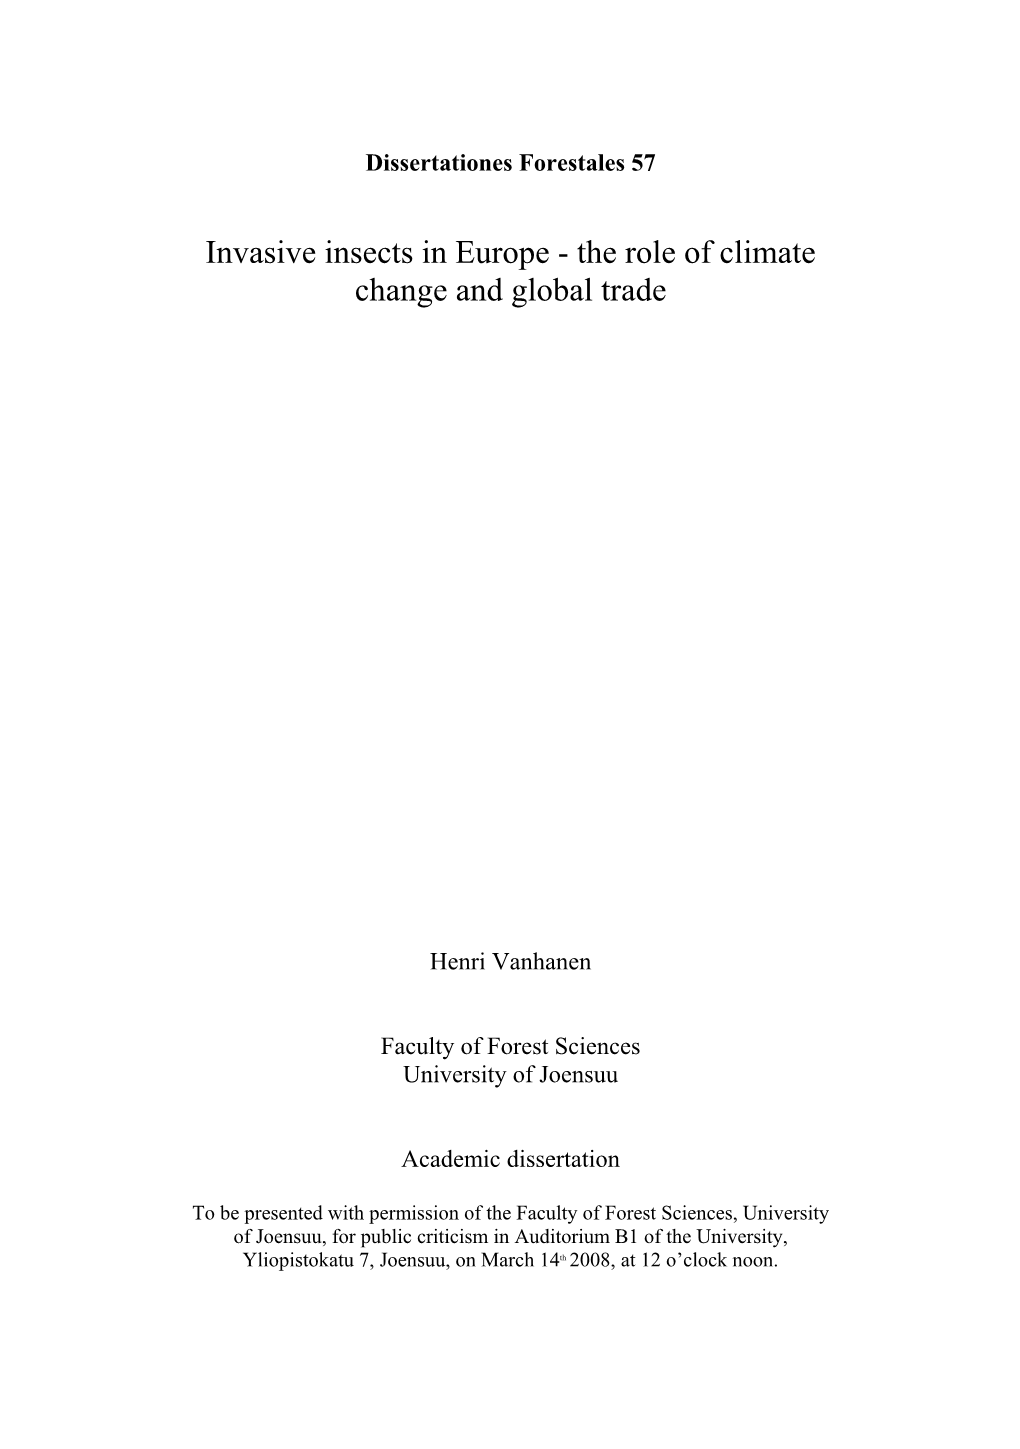 Invasive Insects in Europe - the Role of Climate Change and Global Trade